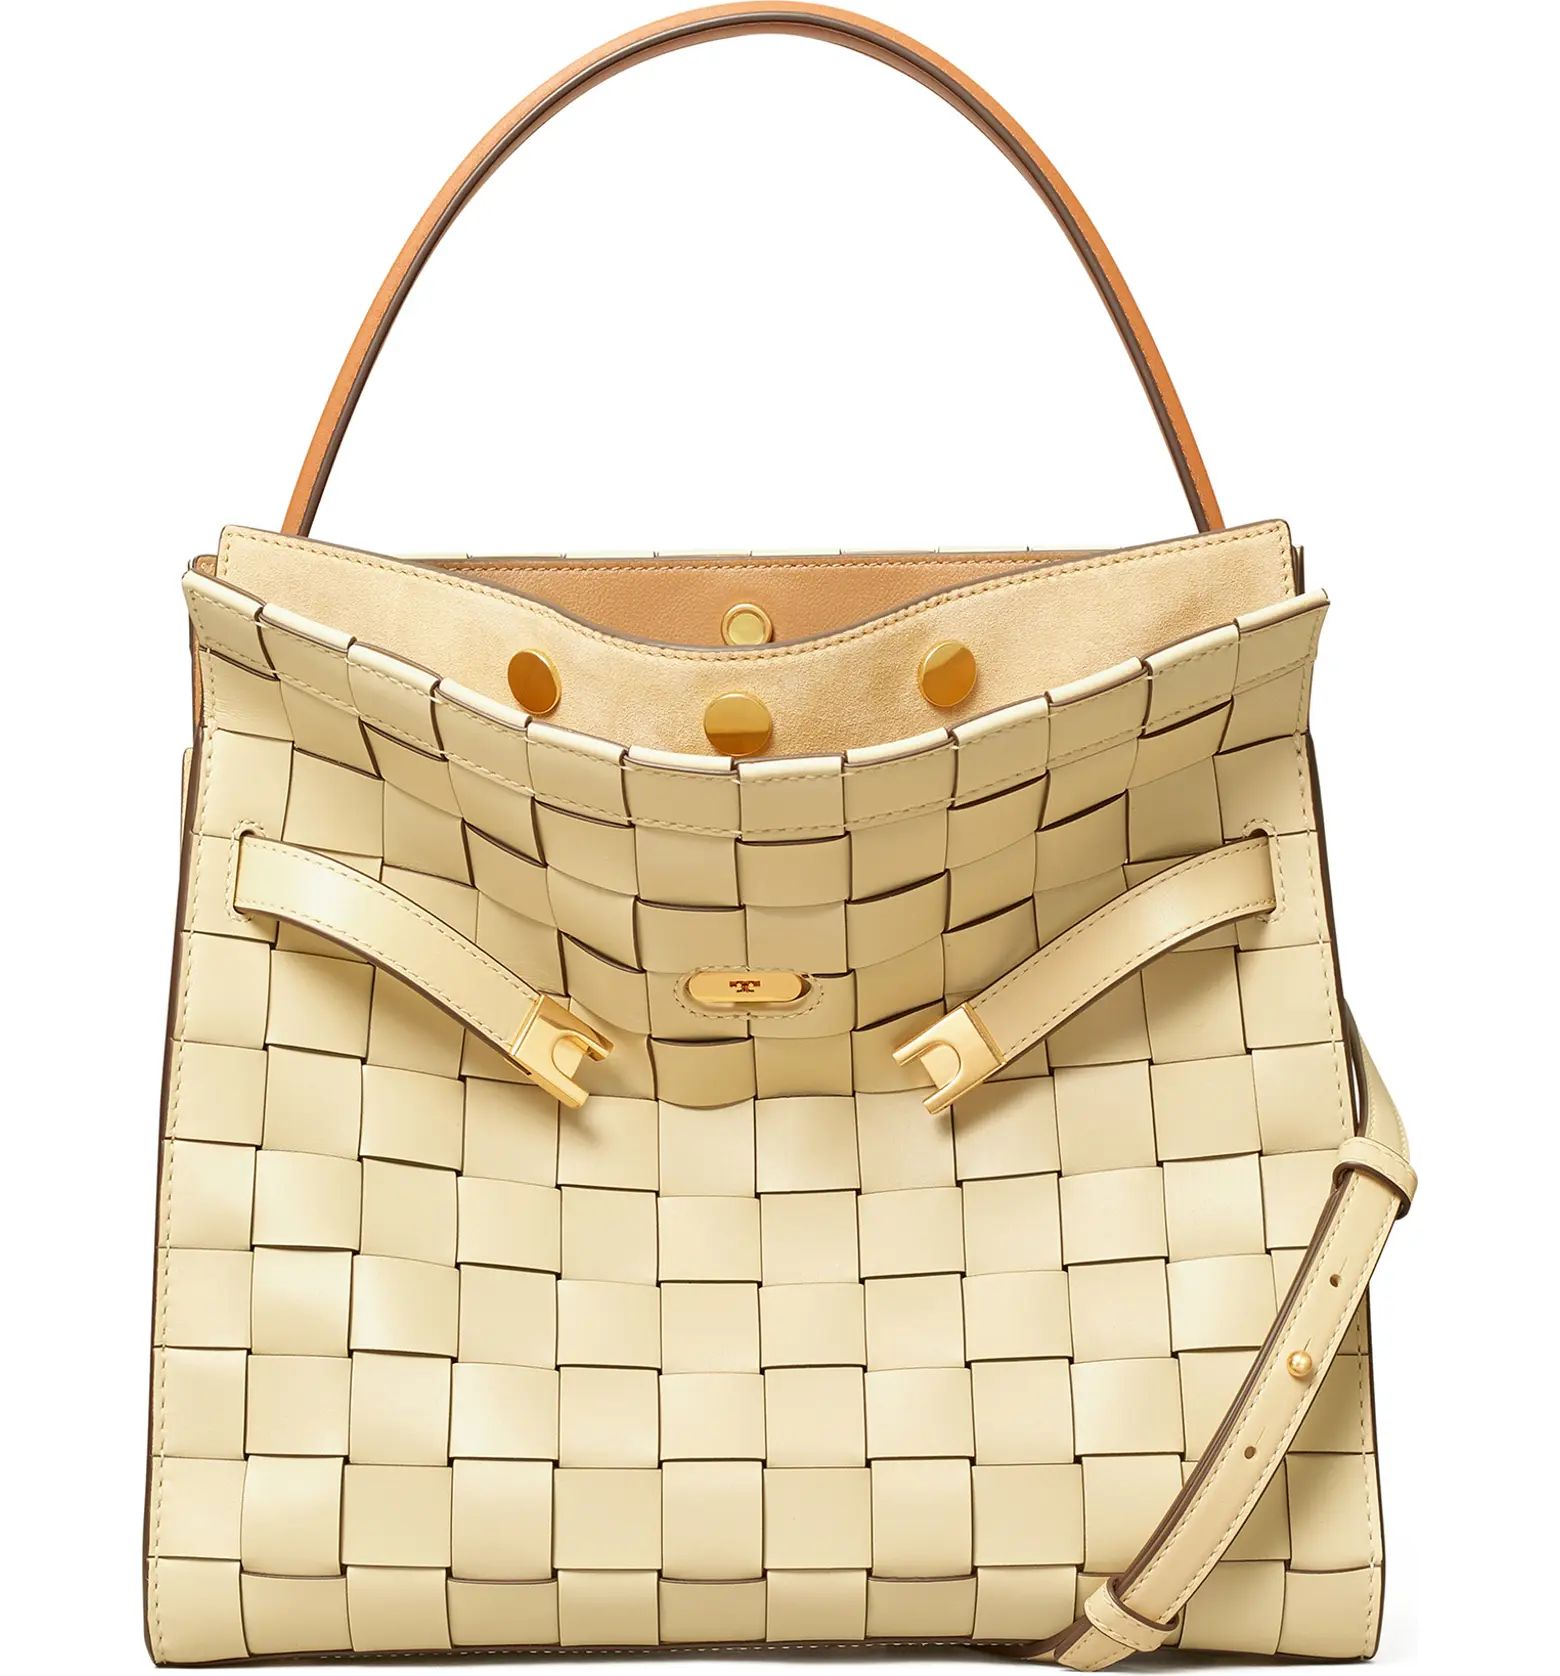 Tory Burch Lee Radziwill Woven Leather Double Bag | Nordstrom | Nordstrom